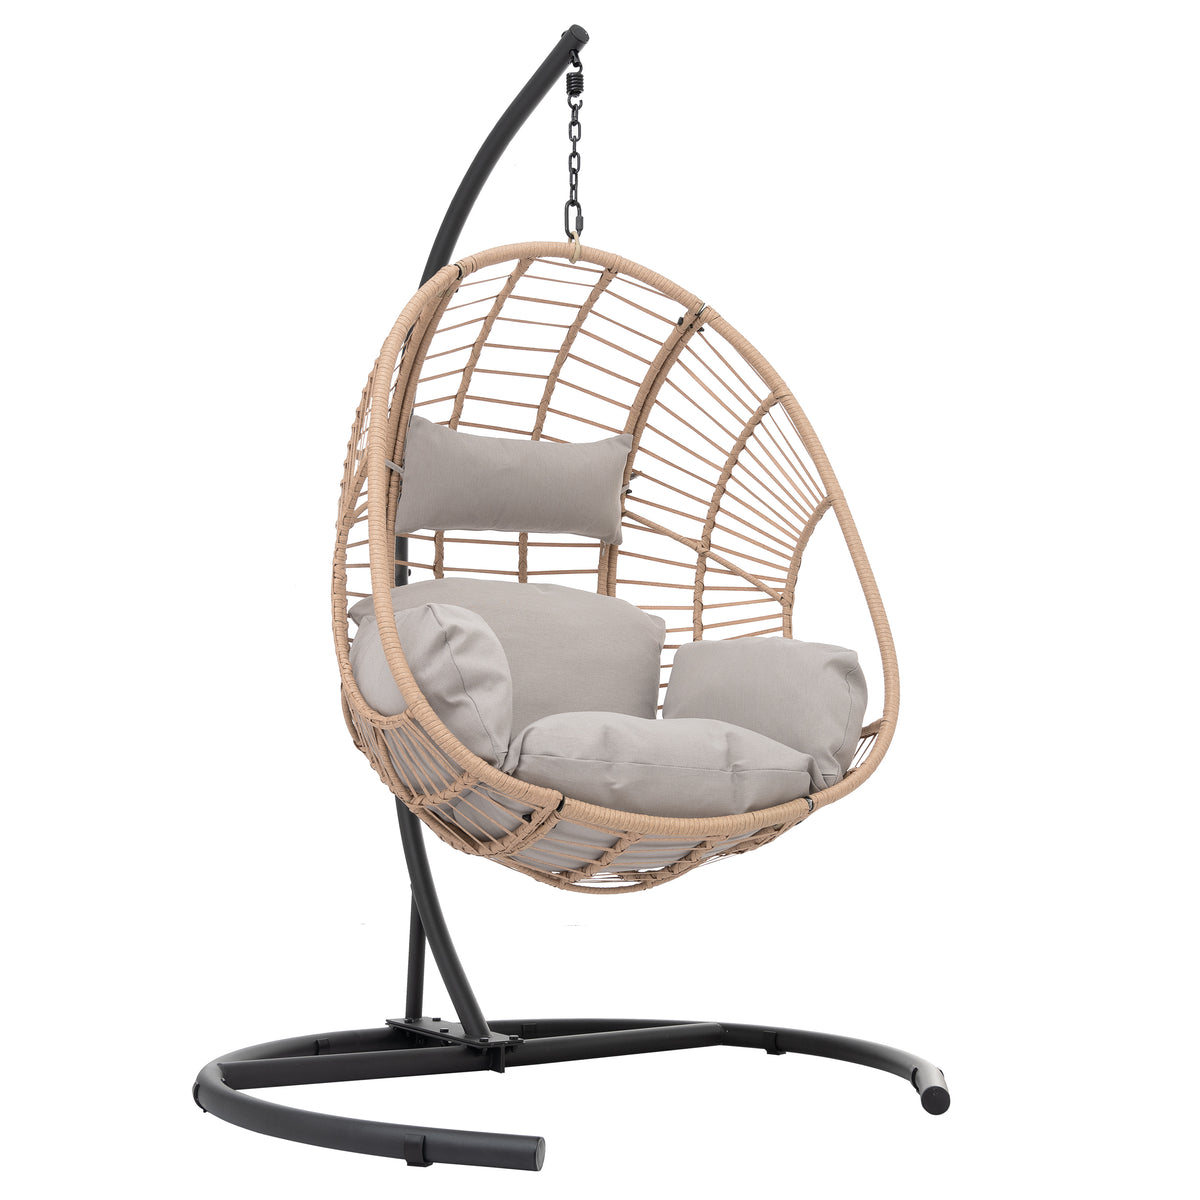 Outdoor Indoor Egg Swing Chair with Natural Color Wicker & Beige Cushion